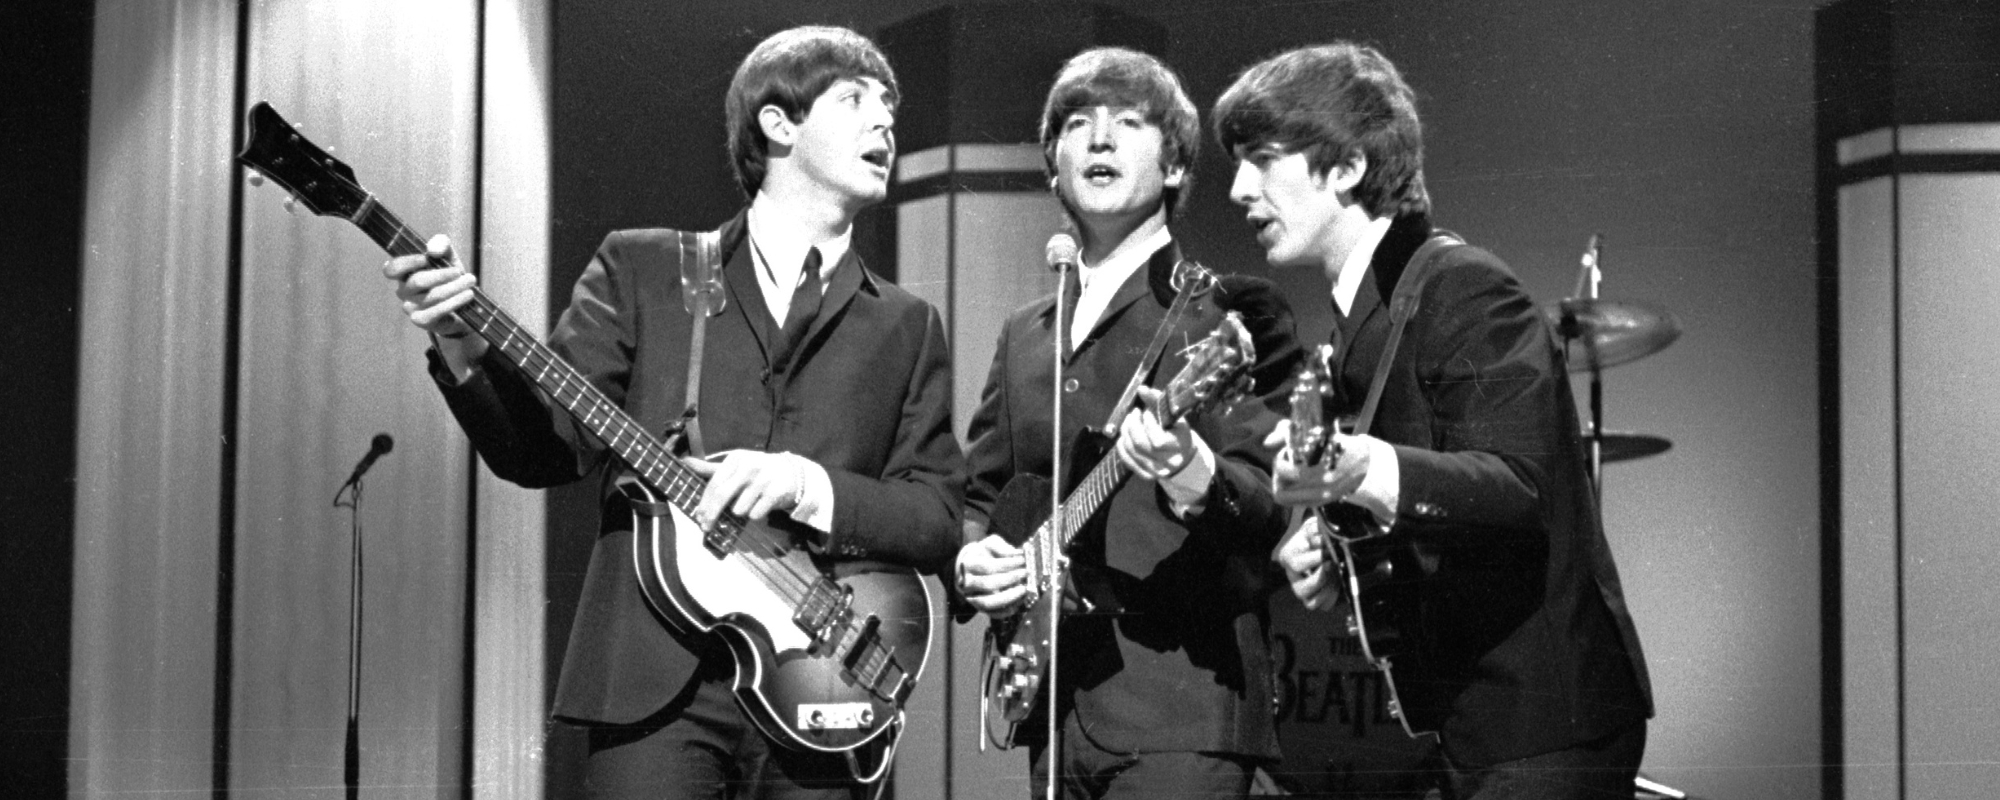 5 Songs that Sound Like They Were Made by The Beatles, but Weren’t